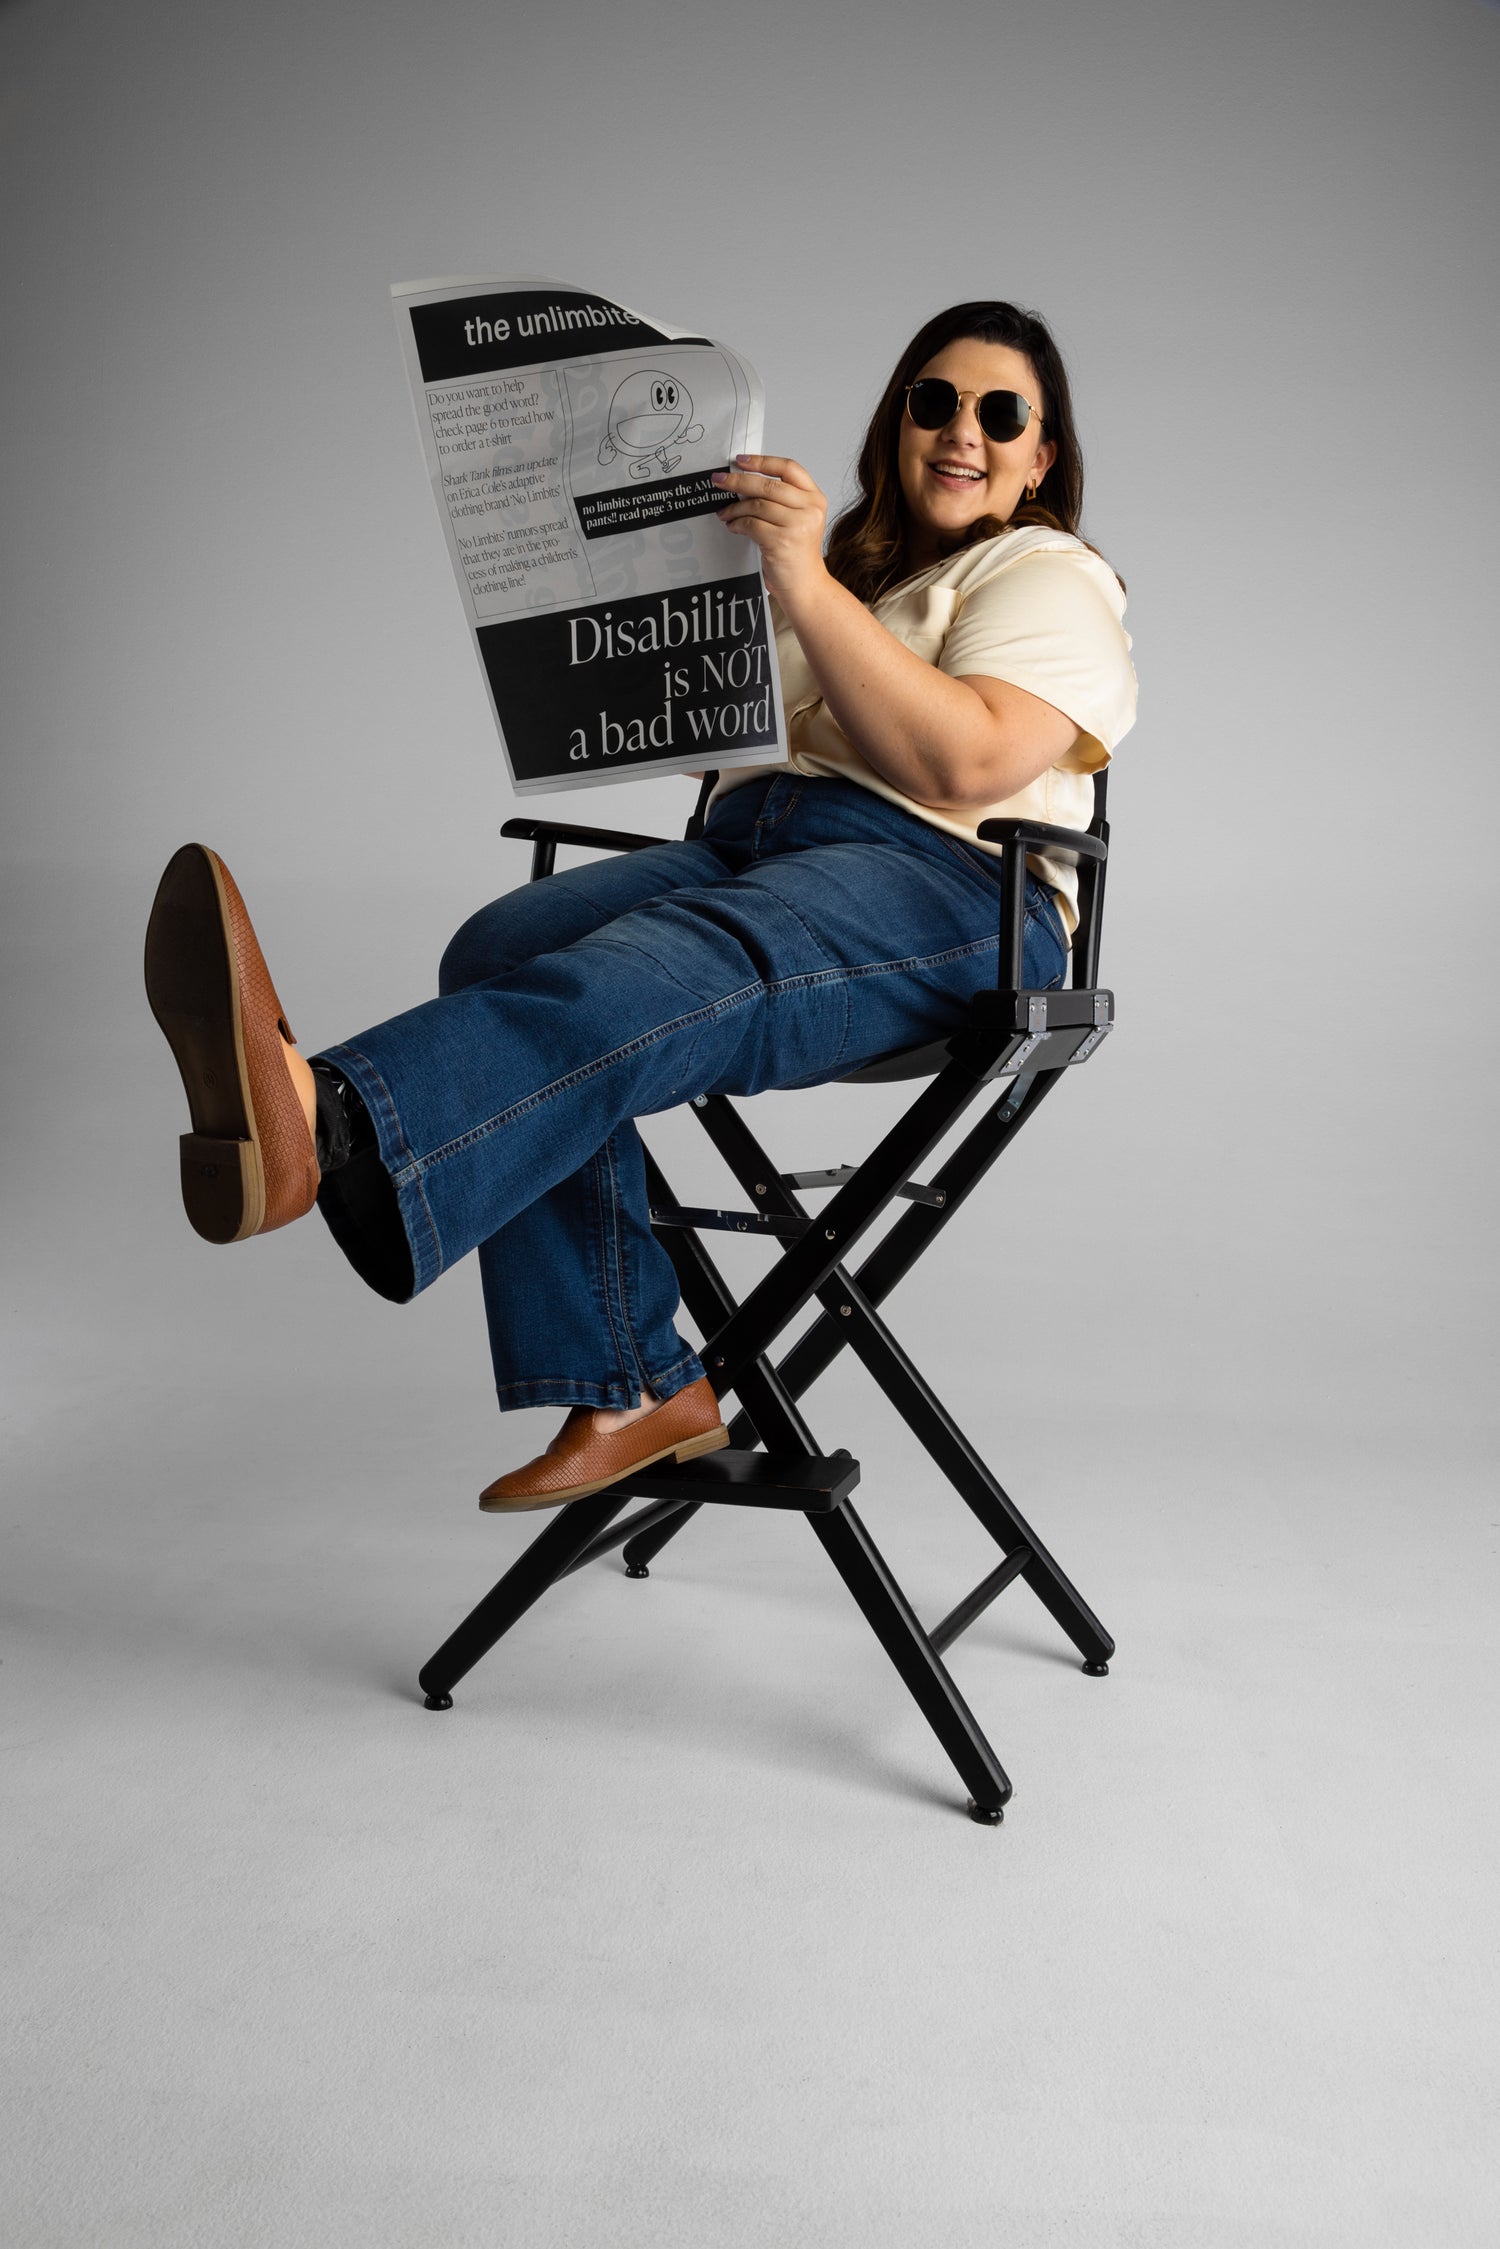 Erica is posing while sitting on a black directors chair. She has one leg kicked out so you can see her brown boots. She is wearing dark denim jeans and a tan blouse, and is holding a newspaper that reads 'Disability is not a bad word'